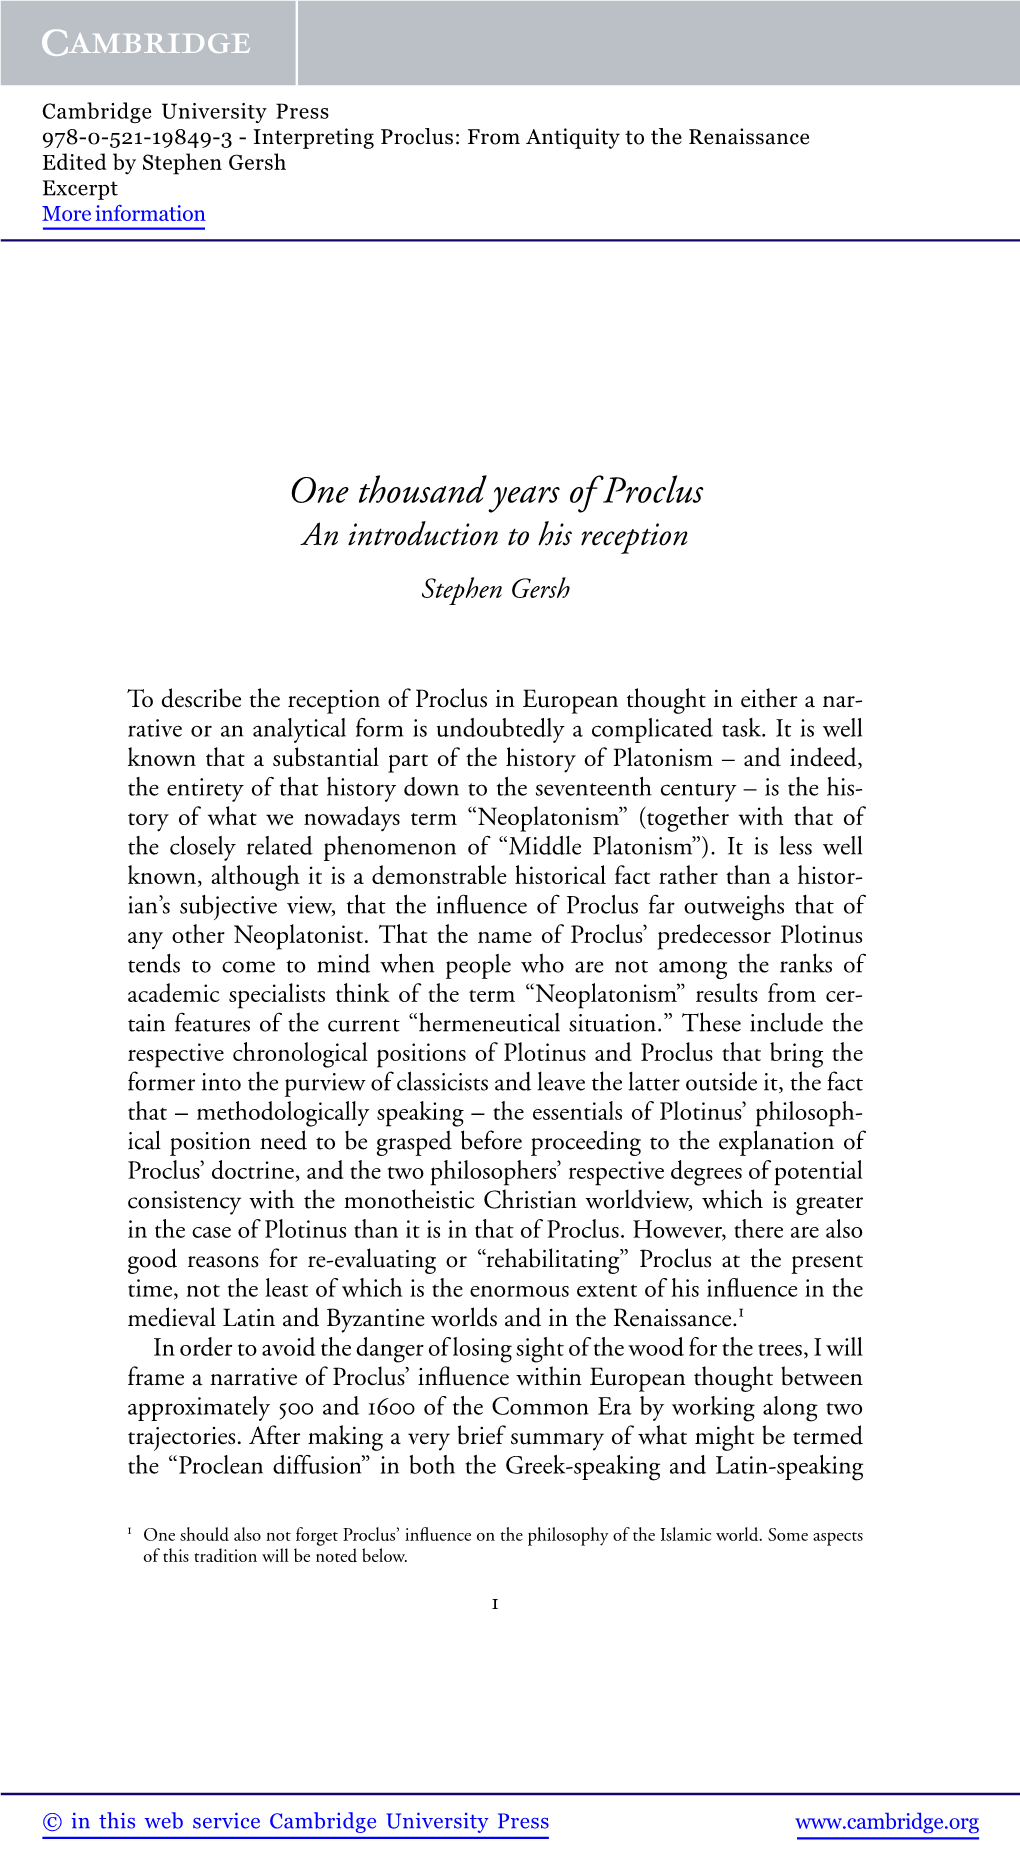 One Thousand Years of Proclus an Introduction to His Reception Stephen Gersh